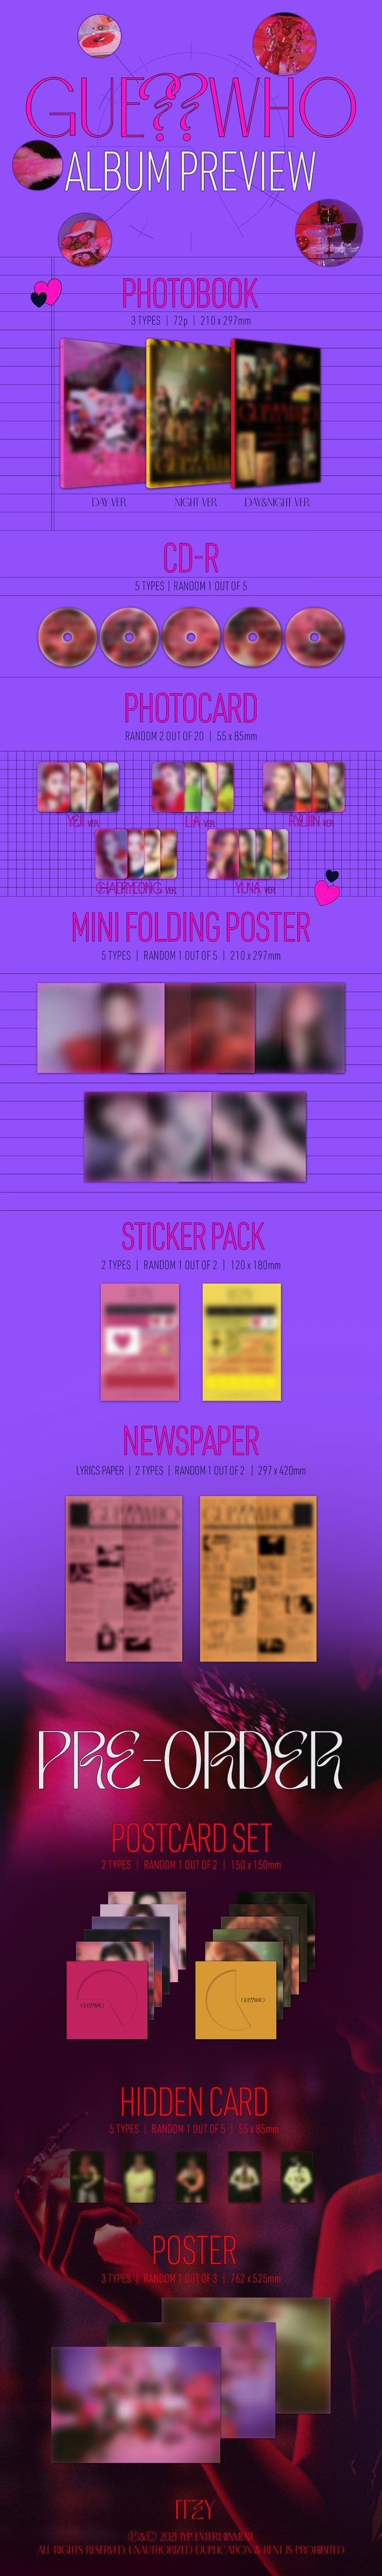 ITZY <GUESS WHO> ALBUM PREVIEW